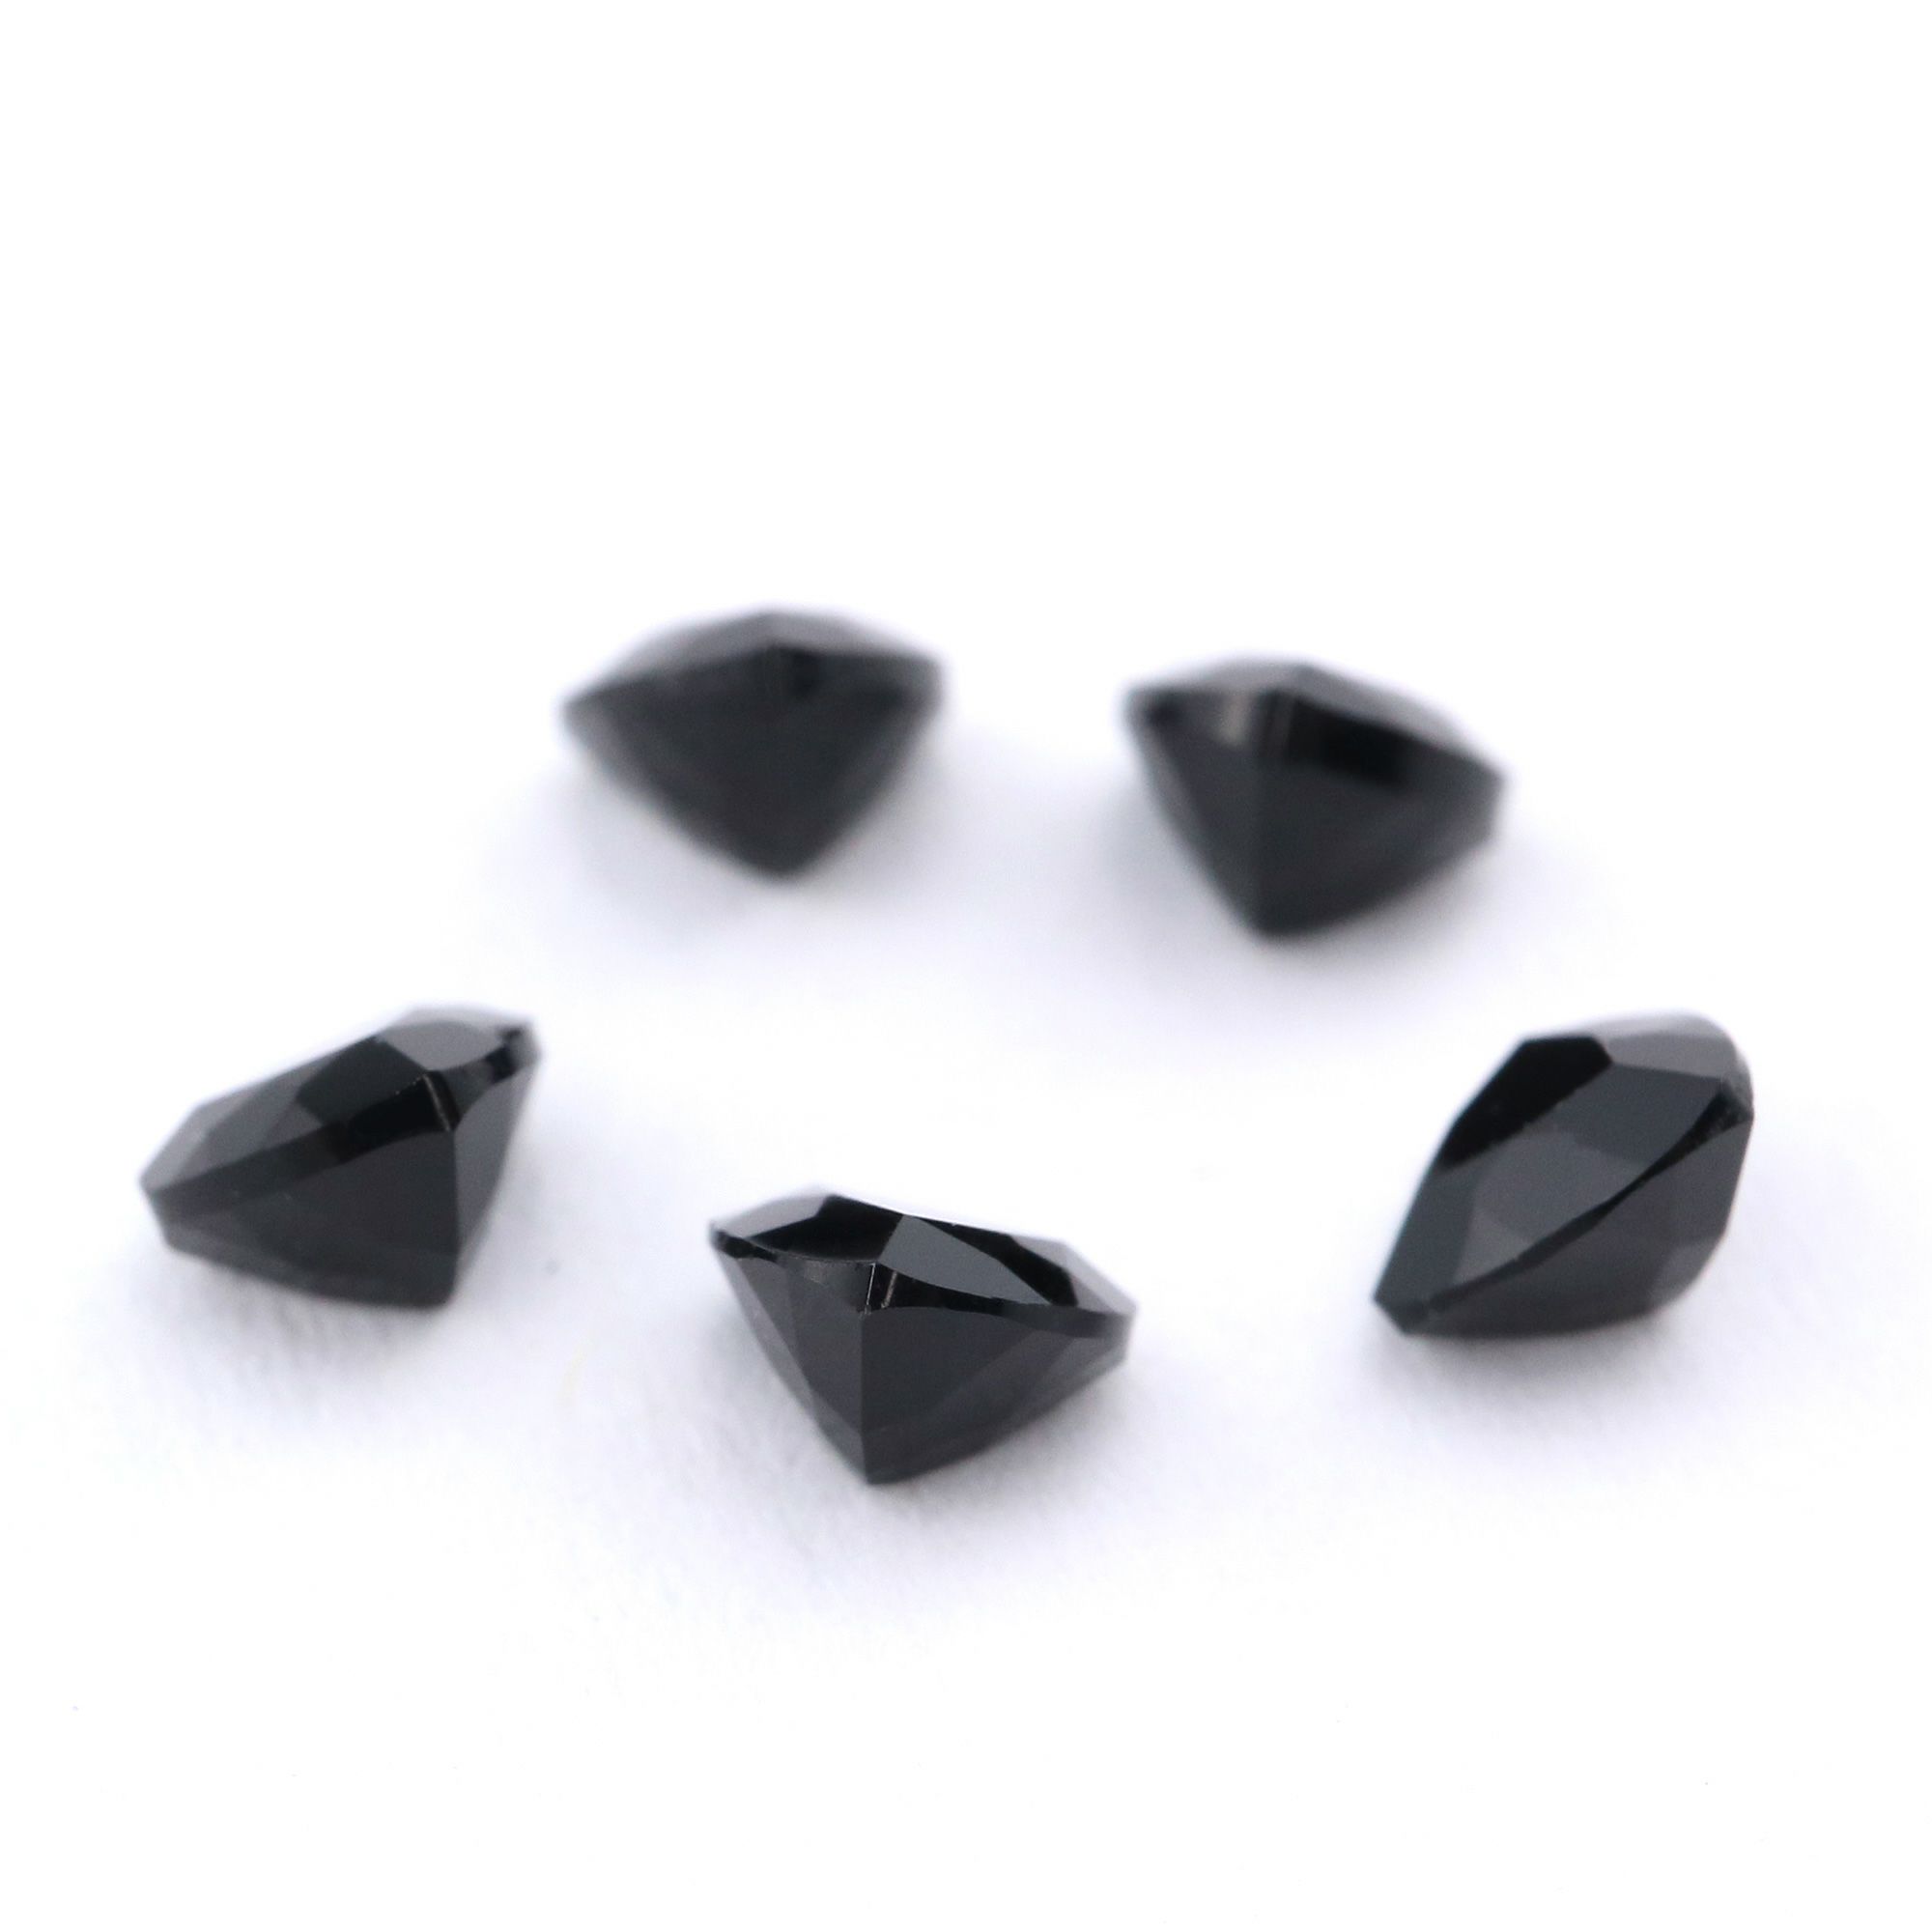 1Pcs 4MM Natural Trillion Black Onyx Faceted Cut Triangle Loose Gemstone Nature Semi Precious Stone DIY Jewelry Supplies 4160028 - Click Image to Close